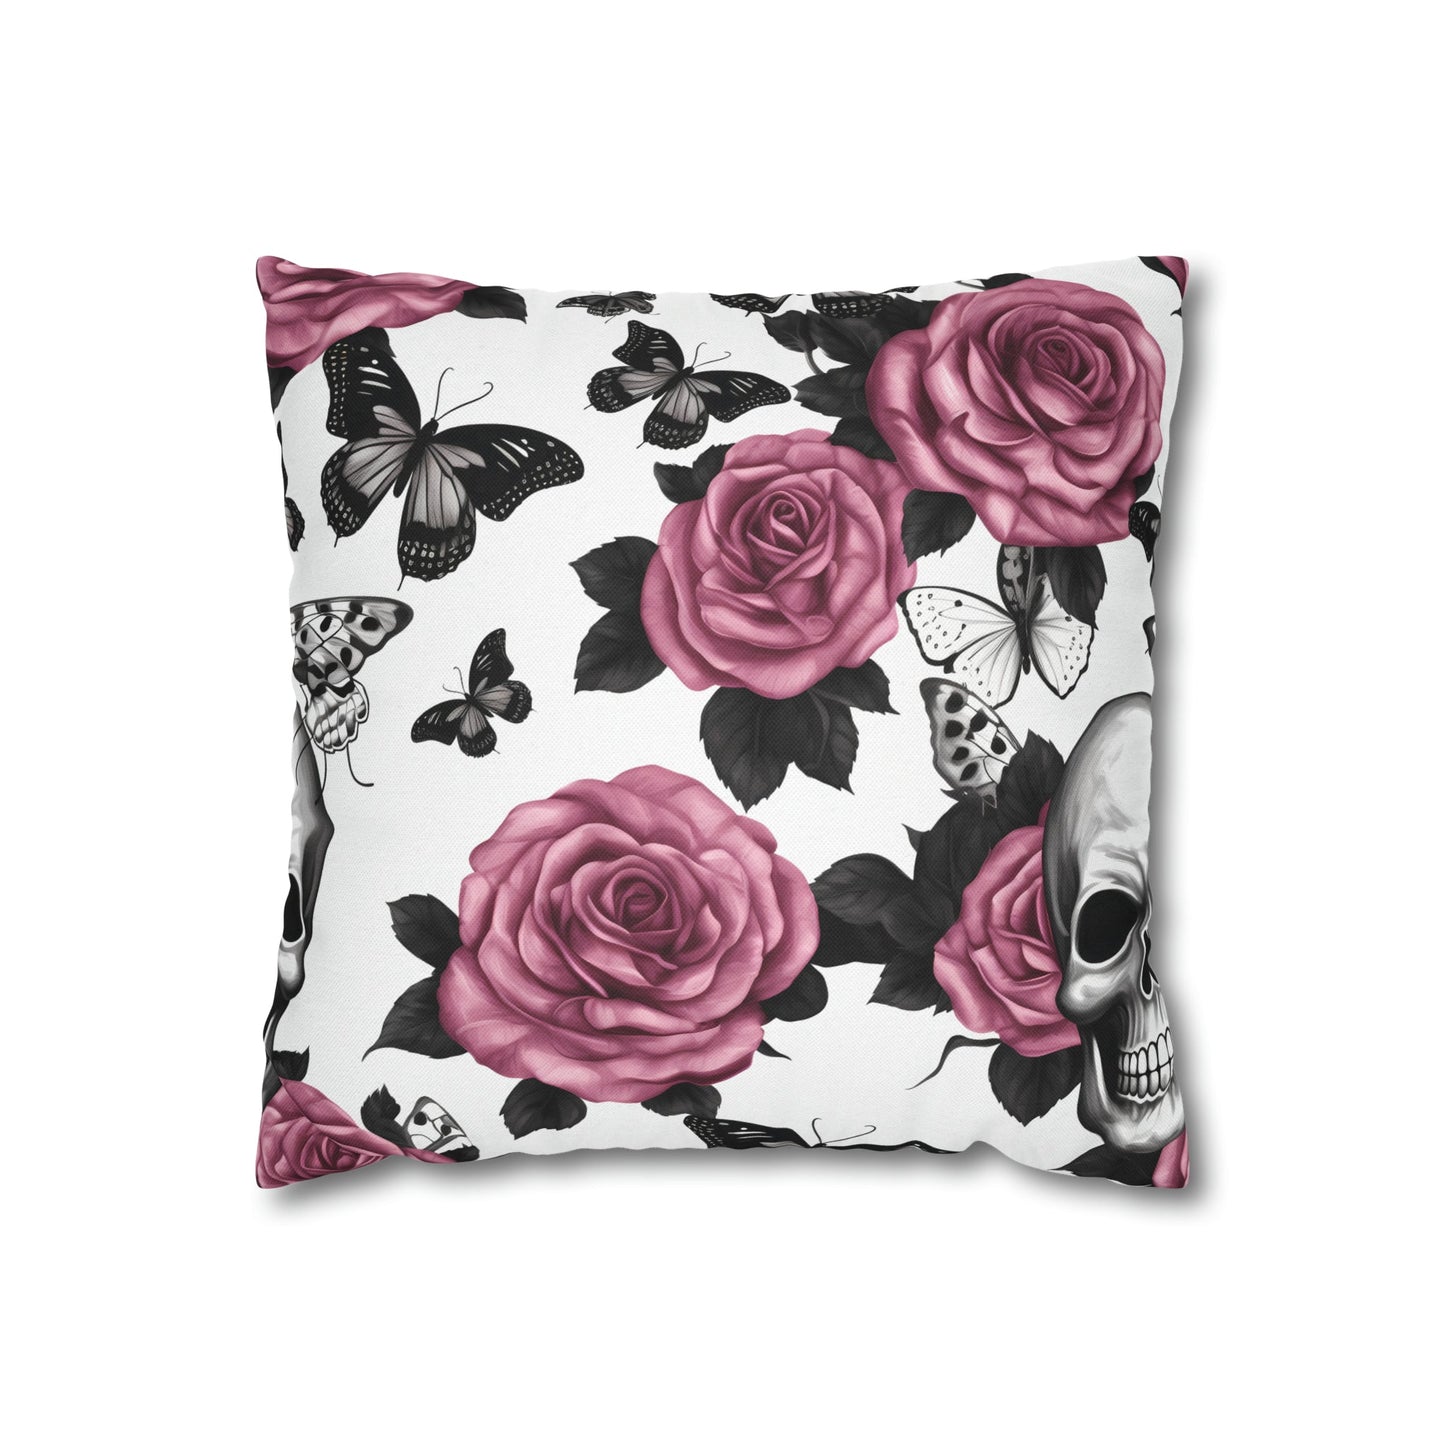 Skulls Pink Roses and Black Butterflies Square Pillow CaseHome DecorVTZdesigns14" × 14"All Over PrintAOPBed